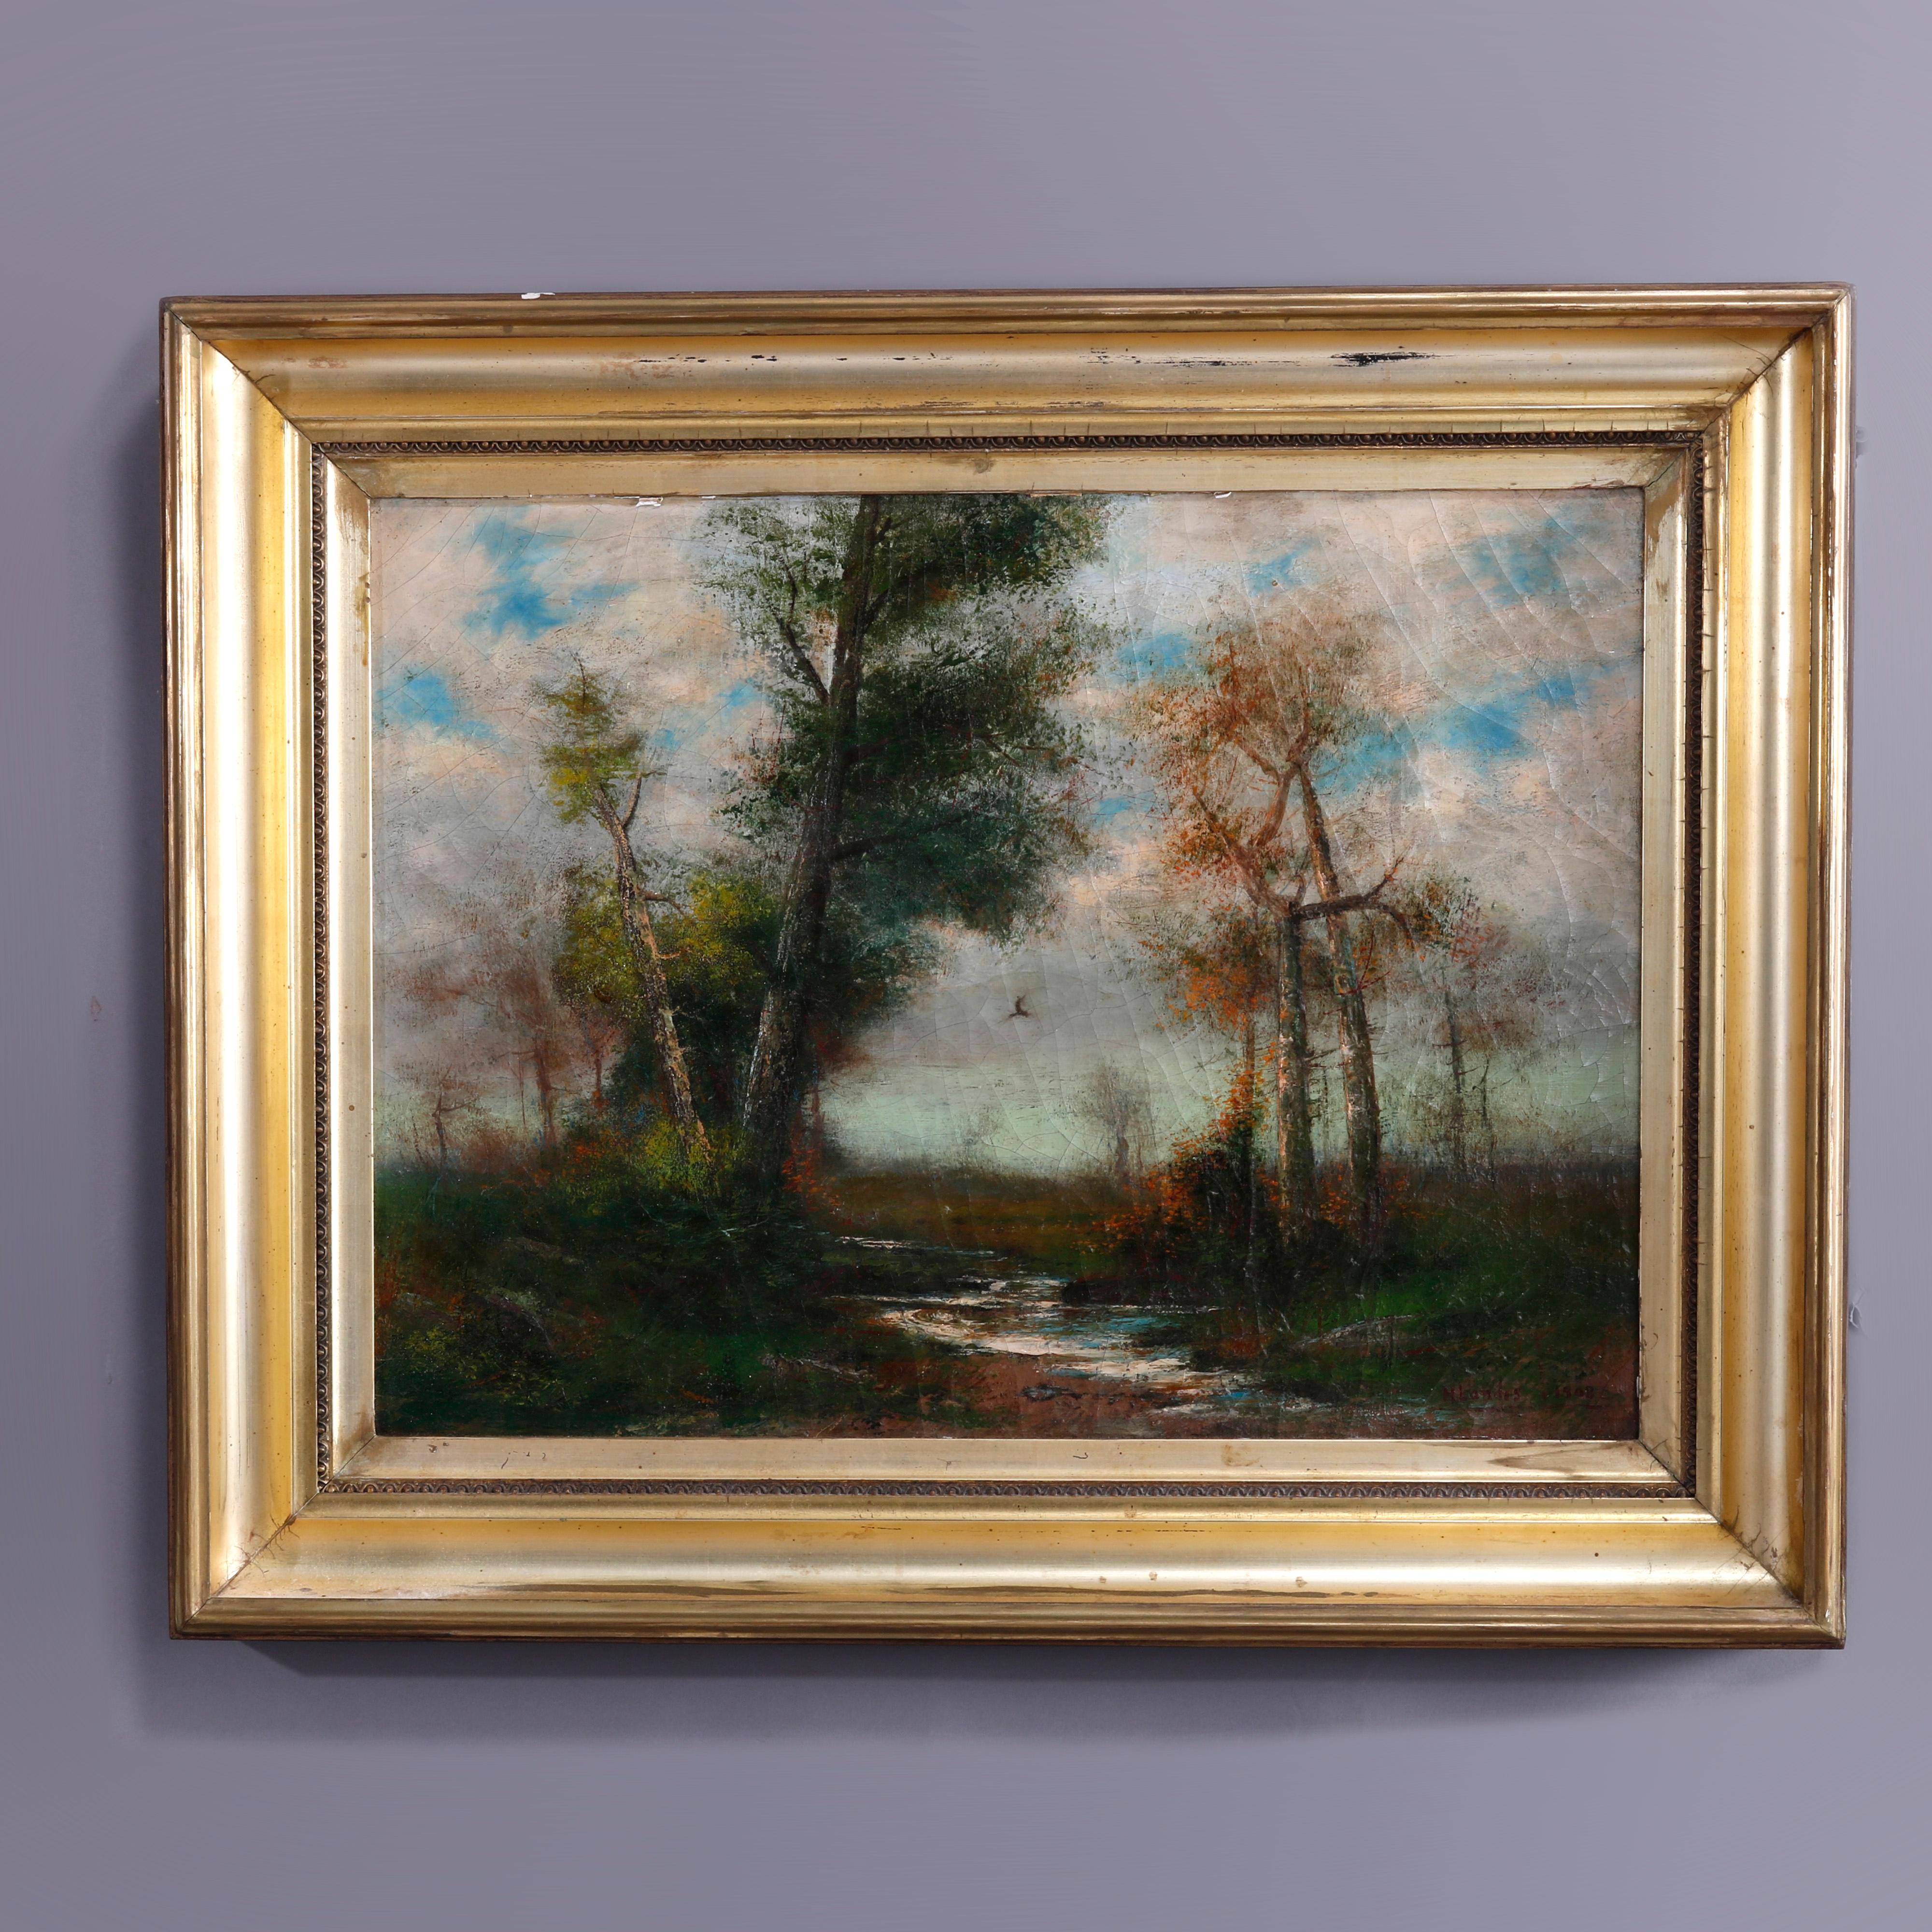 An antique impressionist painting offers oil on canvas landscape with stream, artist signed and dated 1908 lower right, seated in giltwood frame, early 20th century

Measures - 25.5'' H x 30.75'' W x 2.25'' D; sight 24'' x 18.25''.